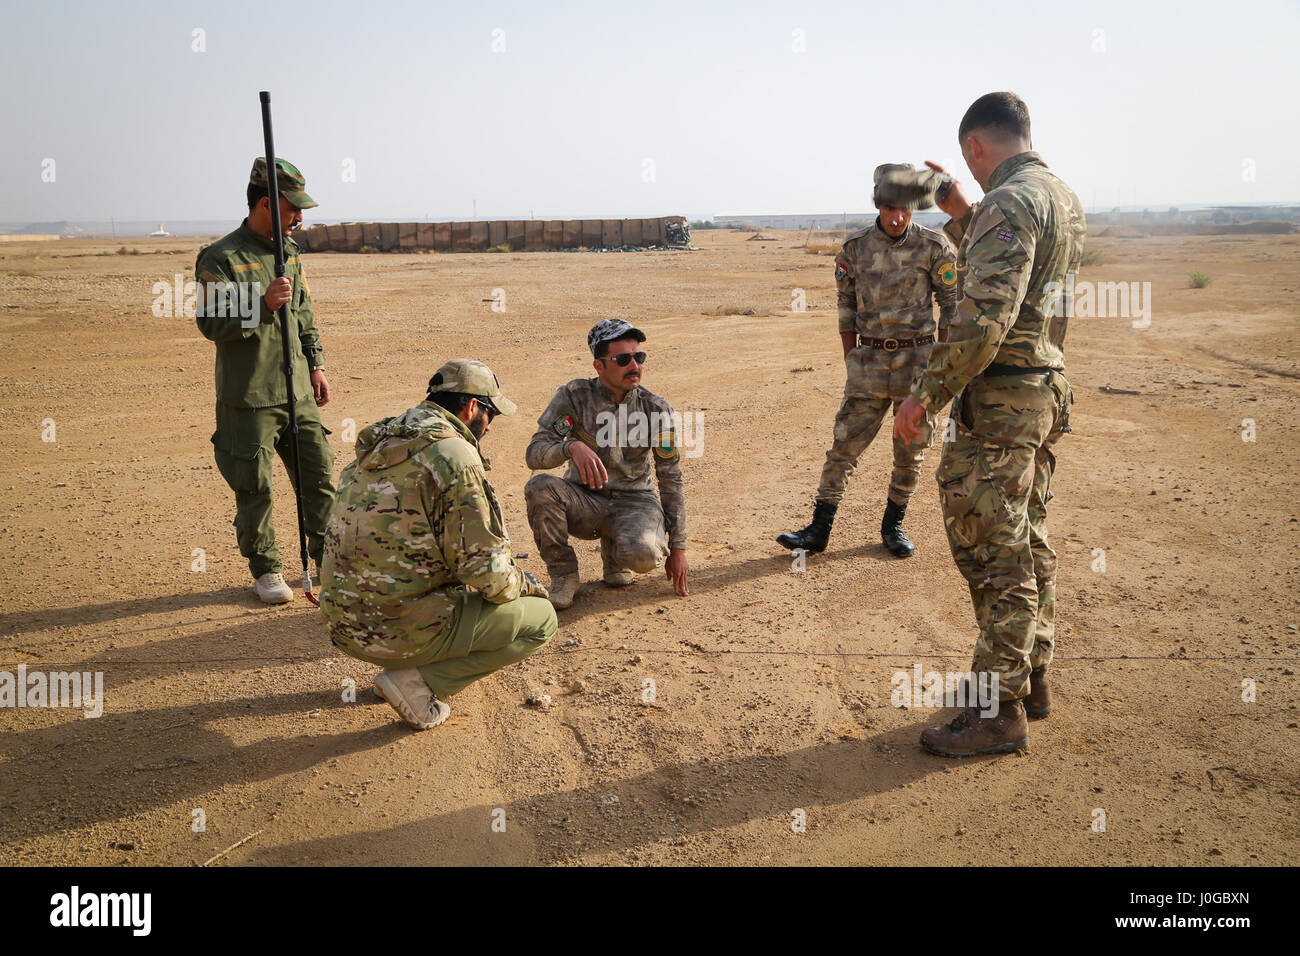 A British trainer, deployed in support of Combined Joint Task Force – Operation Inherent Resolve, explains to Iraqi security forces soldiers how to detect an improvised explosive device on a patrol during counter-IED training at Al Asad Air Base, Iraq, March 29, 2017. This training is part of the overall CJTF- OIR building partner capacity mission by training and improving the capability of partnered forces fighting ISIS. CJTF- OIR is the global Coalition to defeat ISIS in Iraq and Syria. (U.S. Army photo by Sgt. Lisa Soy) Stock Photo